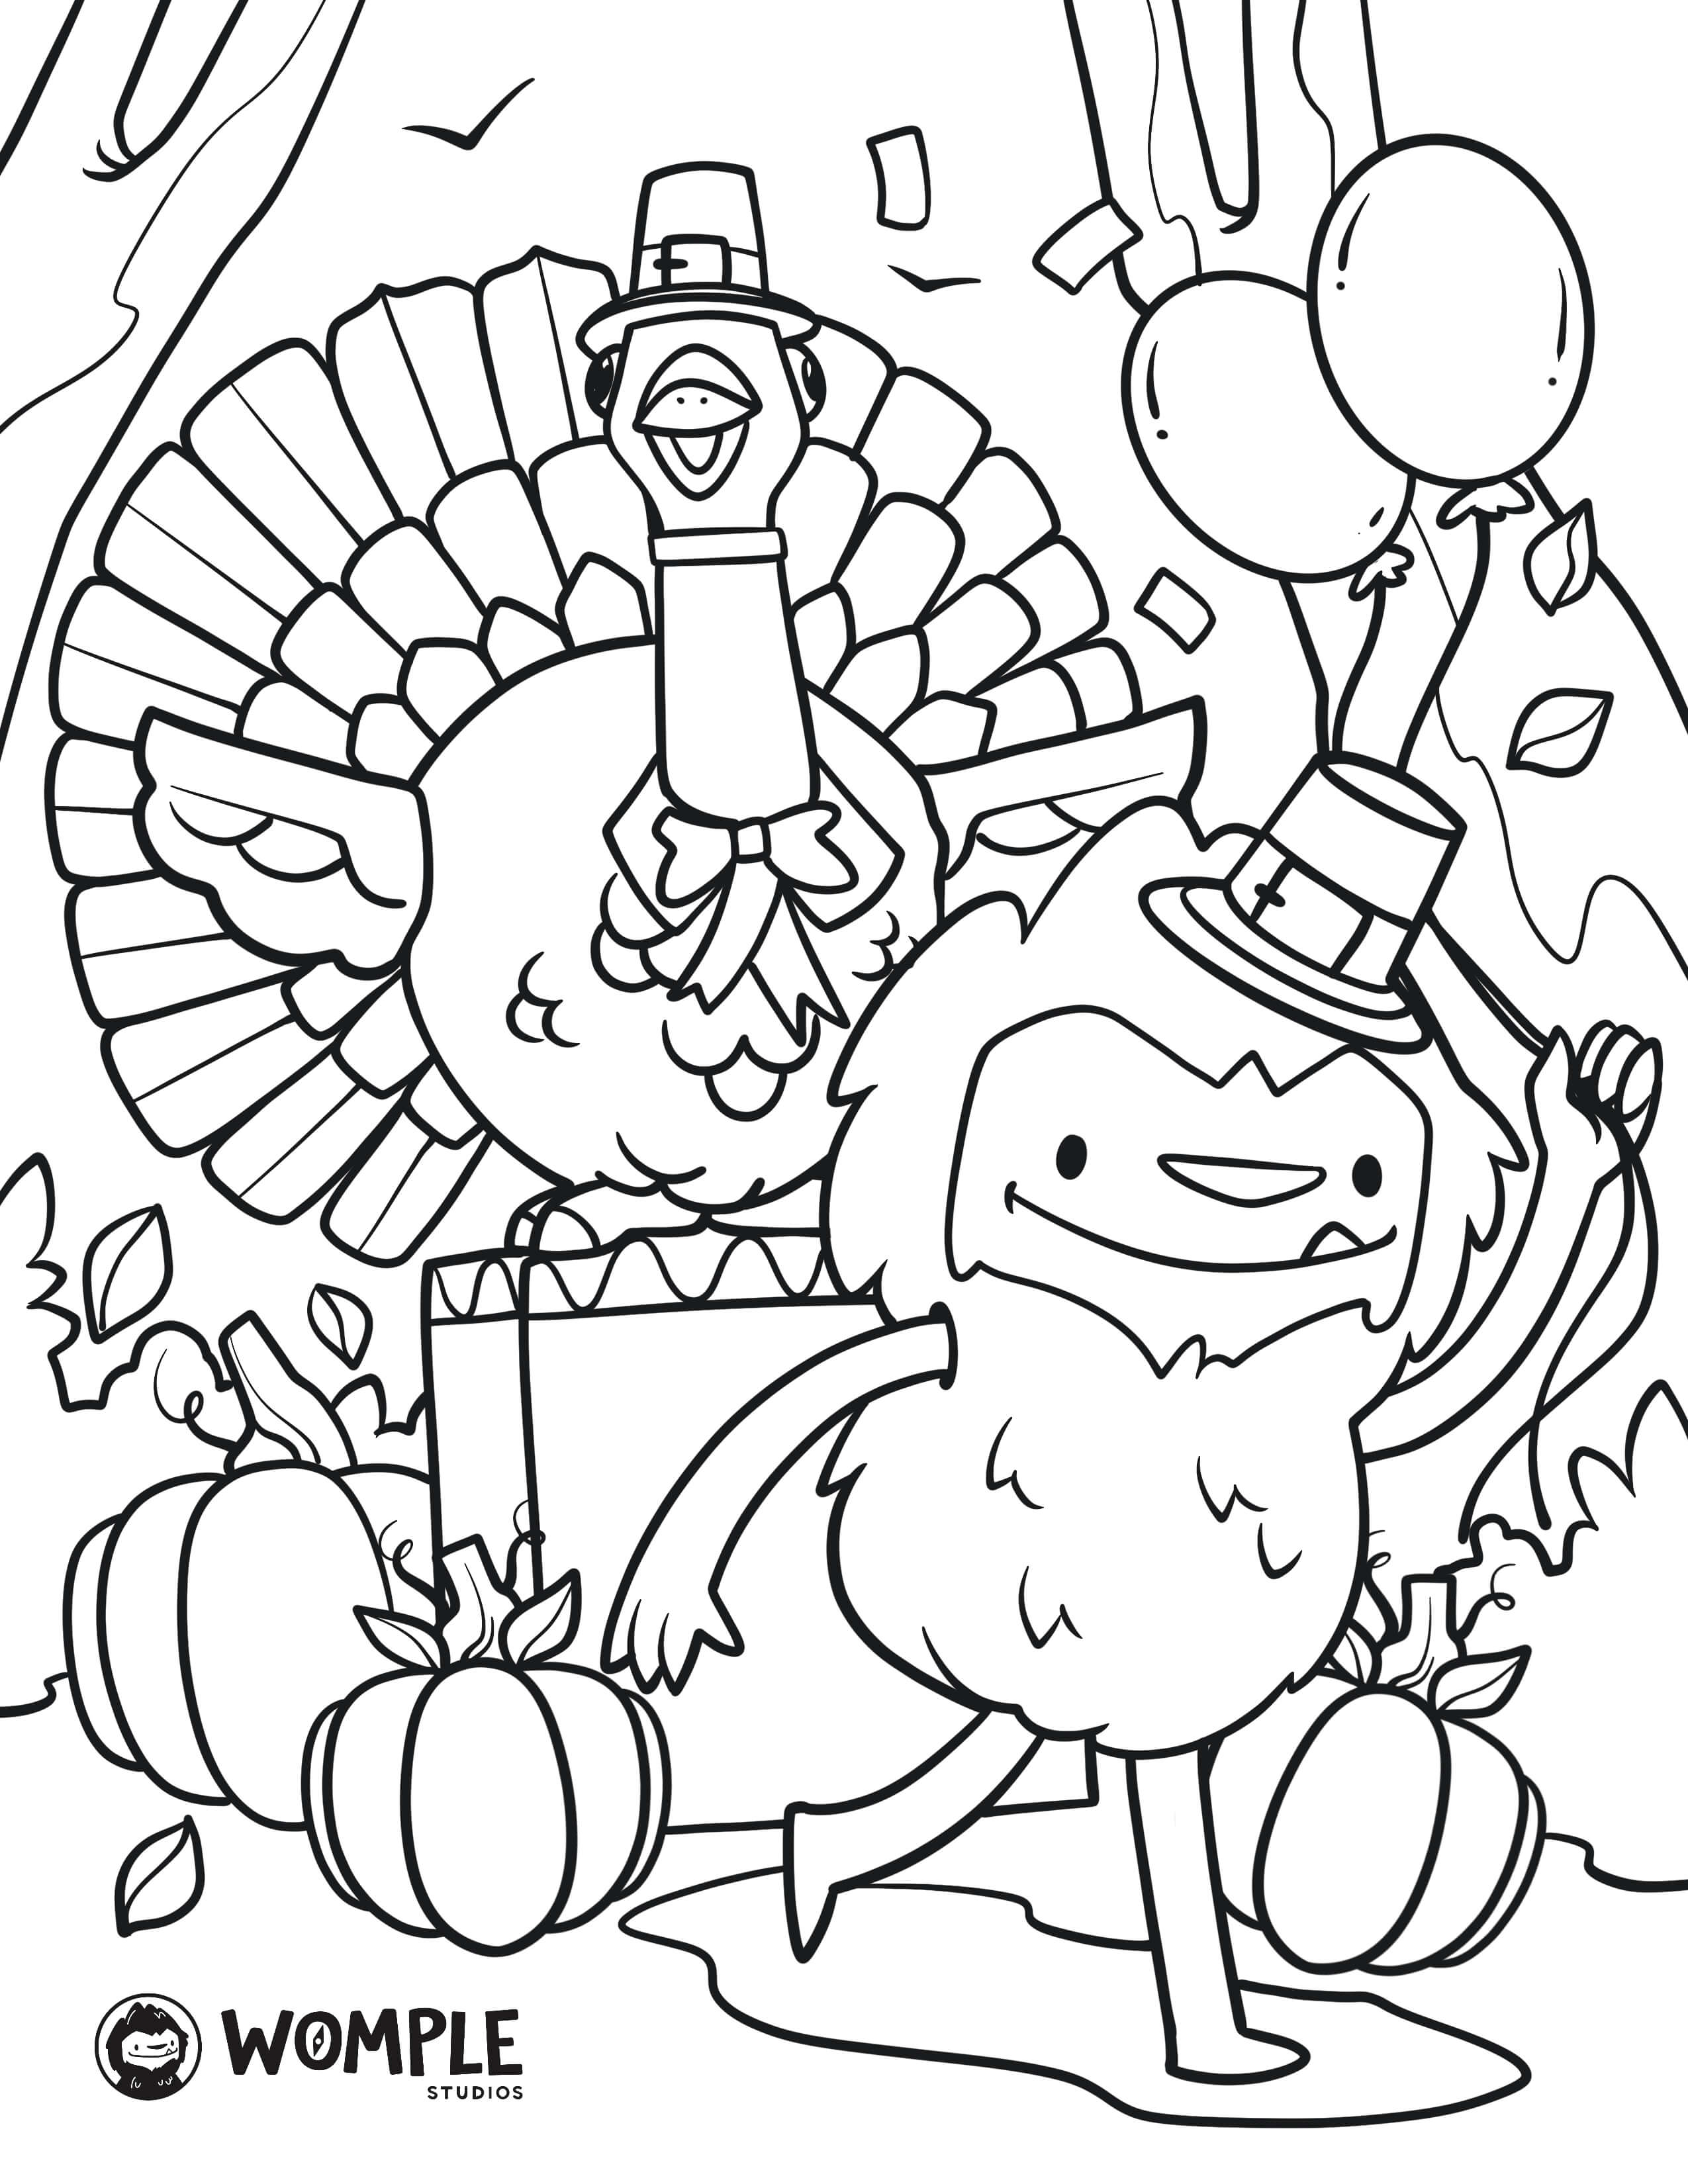 Womple in the Macy's Parade for Thanksgiving coloring page